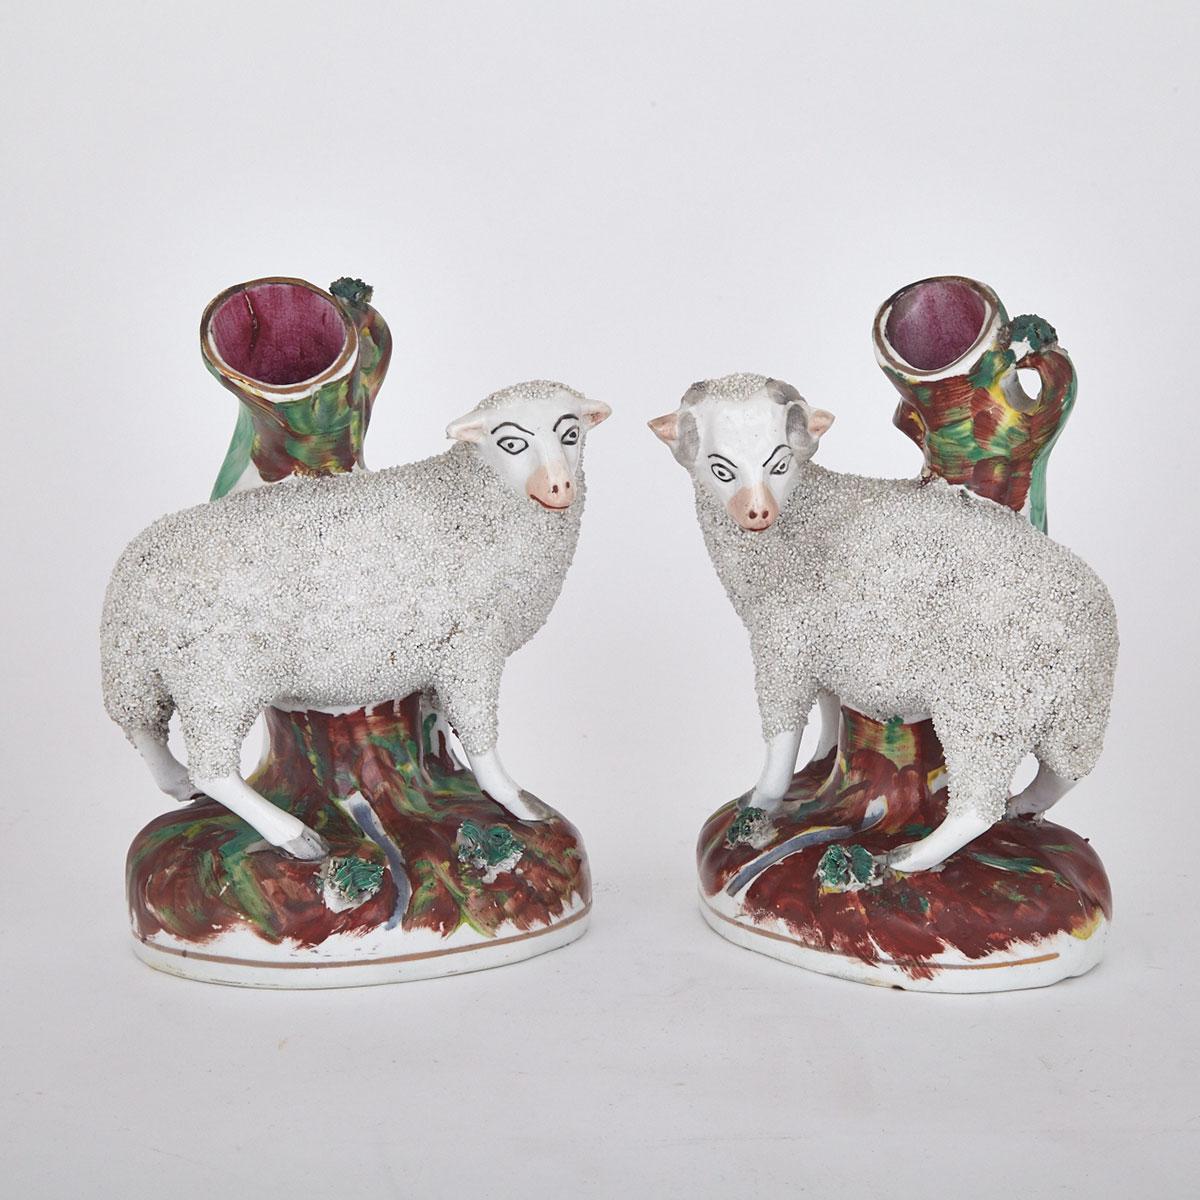 Pair of Staffordshire Sheep Spill Vases, mid-19th century